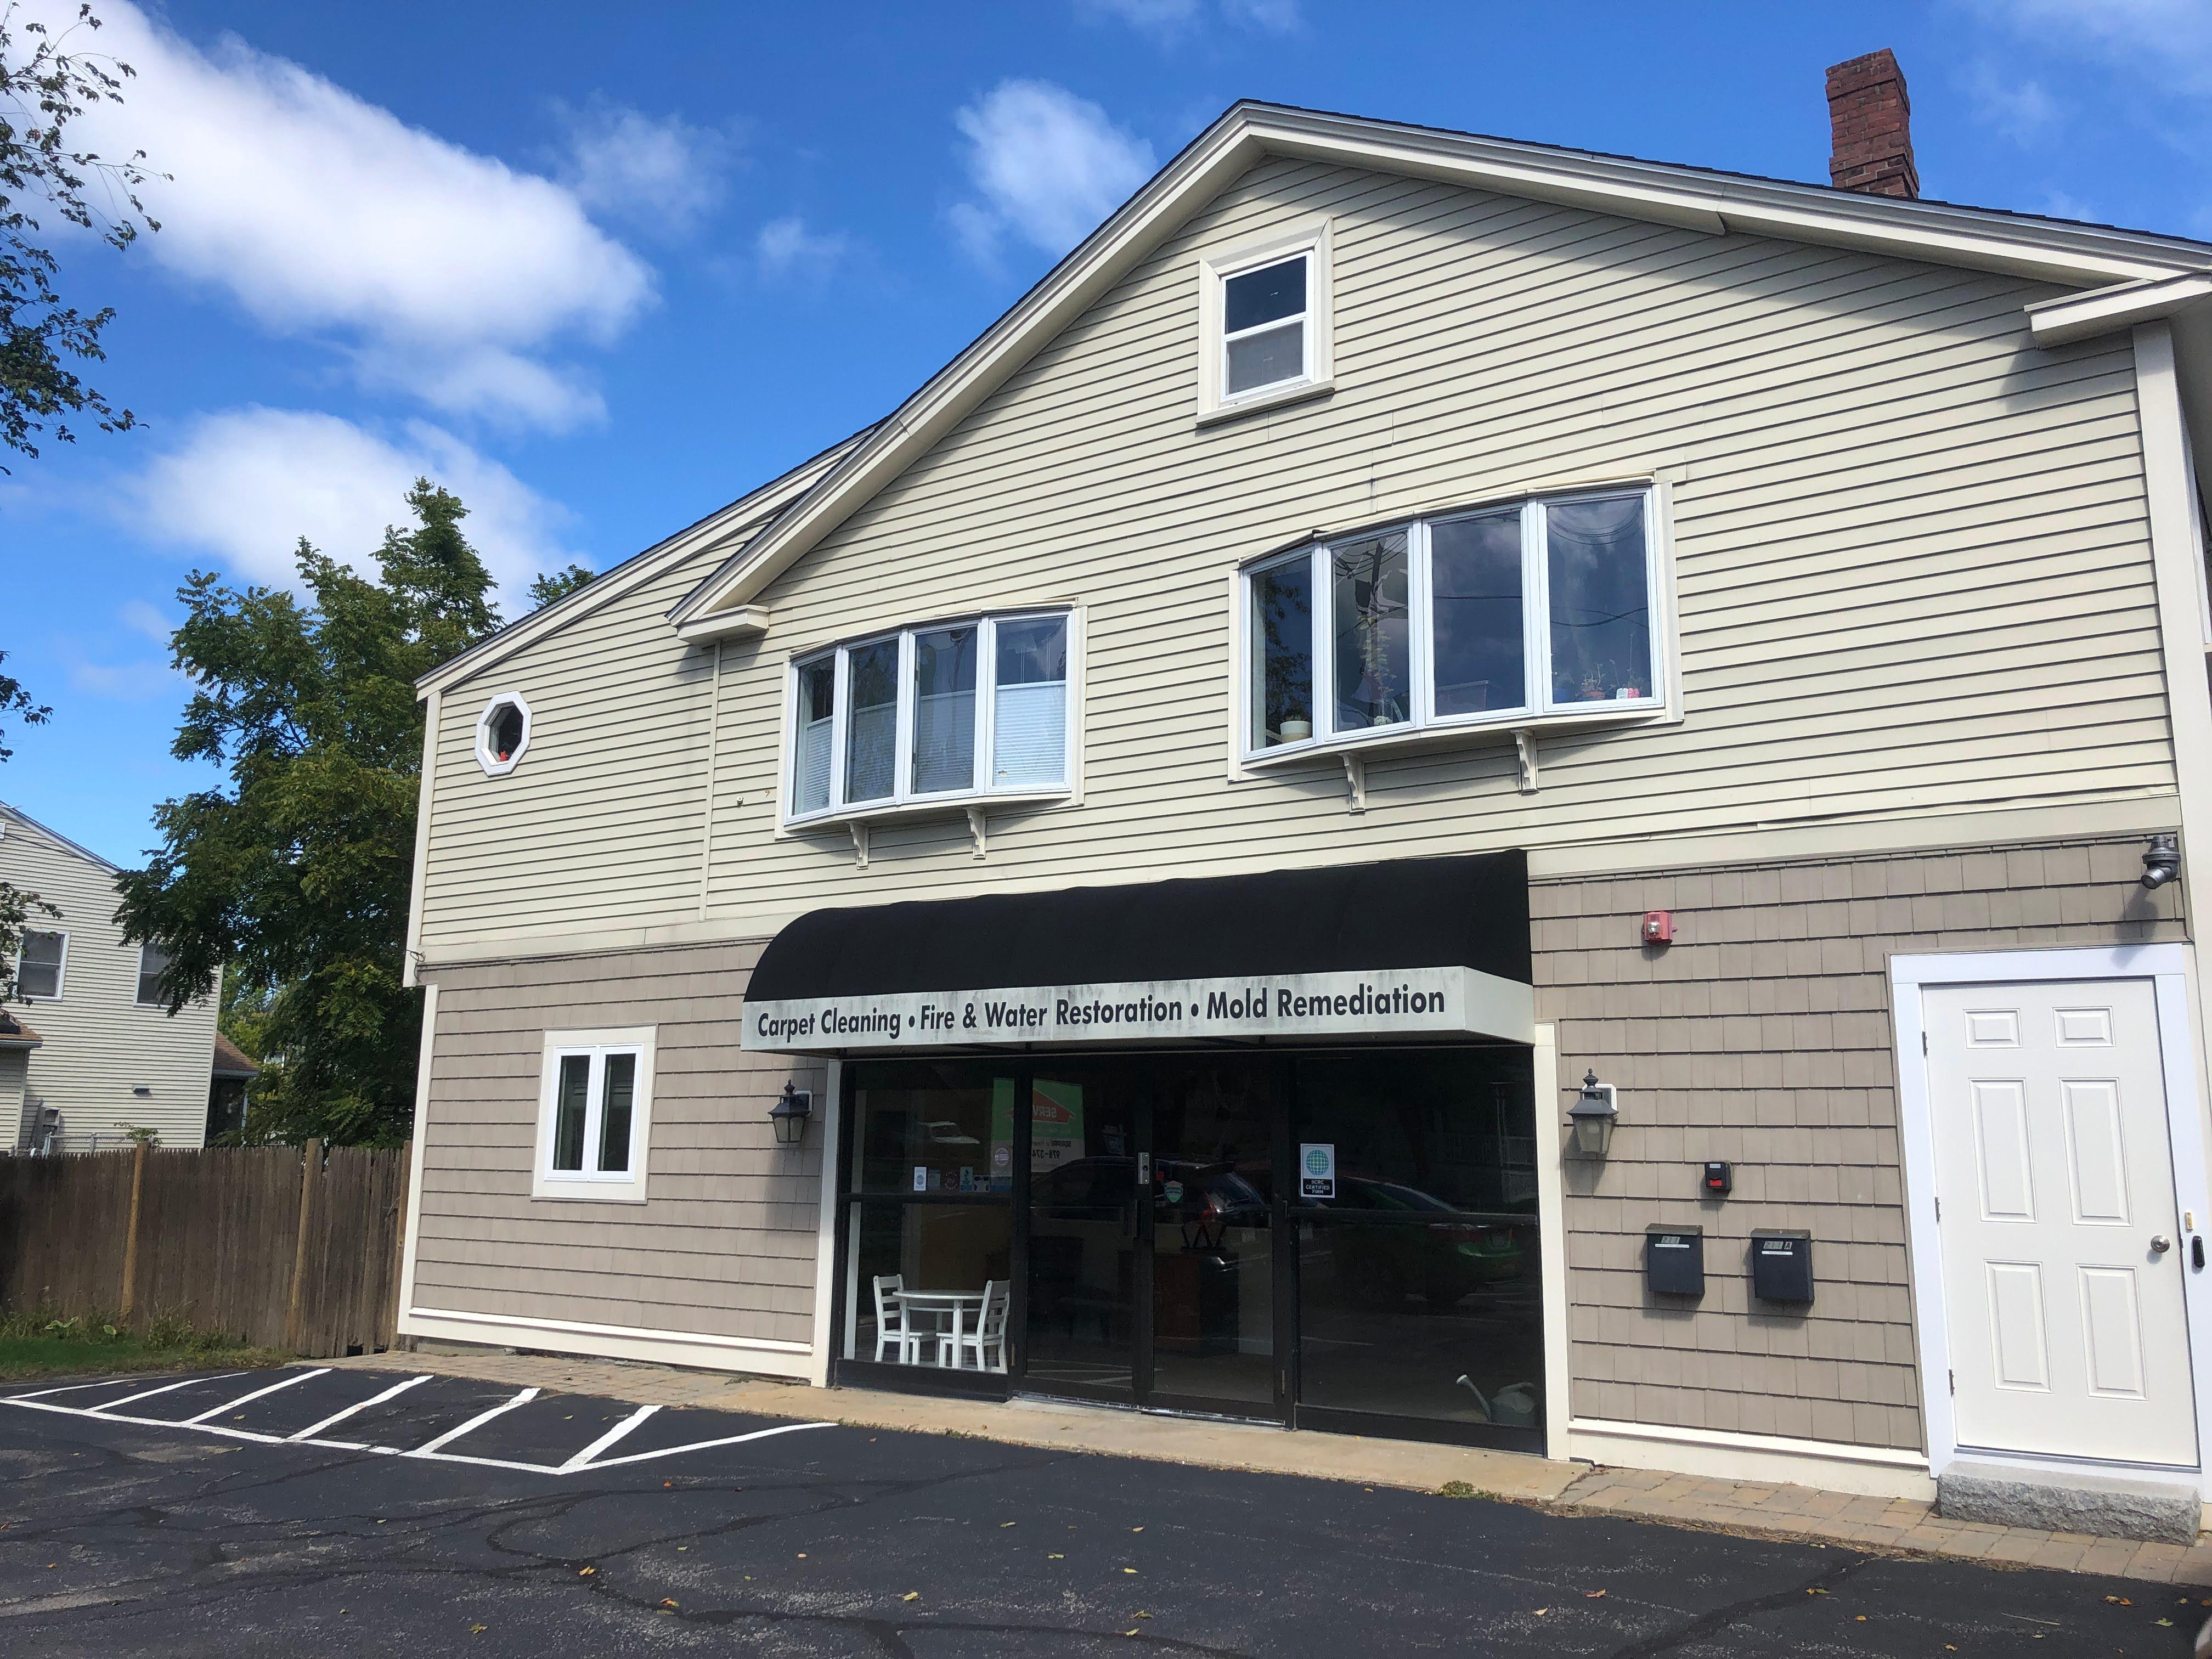 SERVPRO of Stoneham/Wakefield is based out of parent franchise, SERVPRO of Haverhill/Newburyport's main office at 211 Broadway, Haverhill, MA. Located on Route 97, minutes from I-495, we are available 24/7 for emergency services in Stoneham, MA, Wakefield, MA, Reading, MA, and North Reading, MA and surrounding communities.